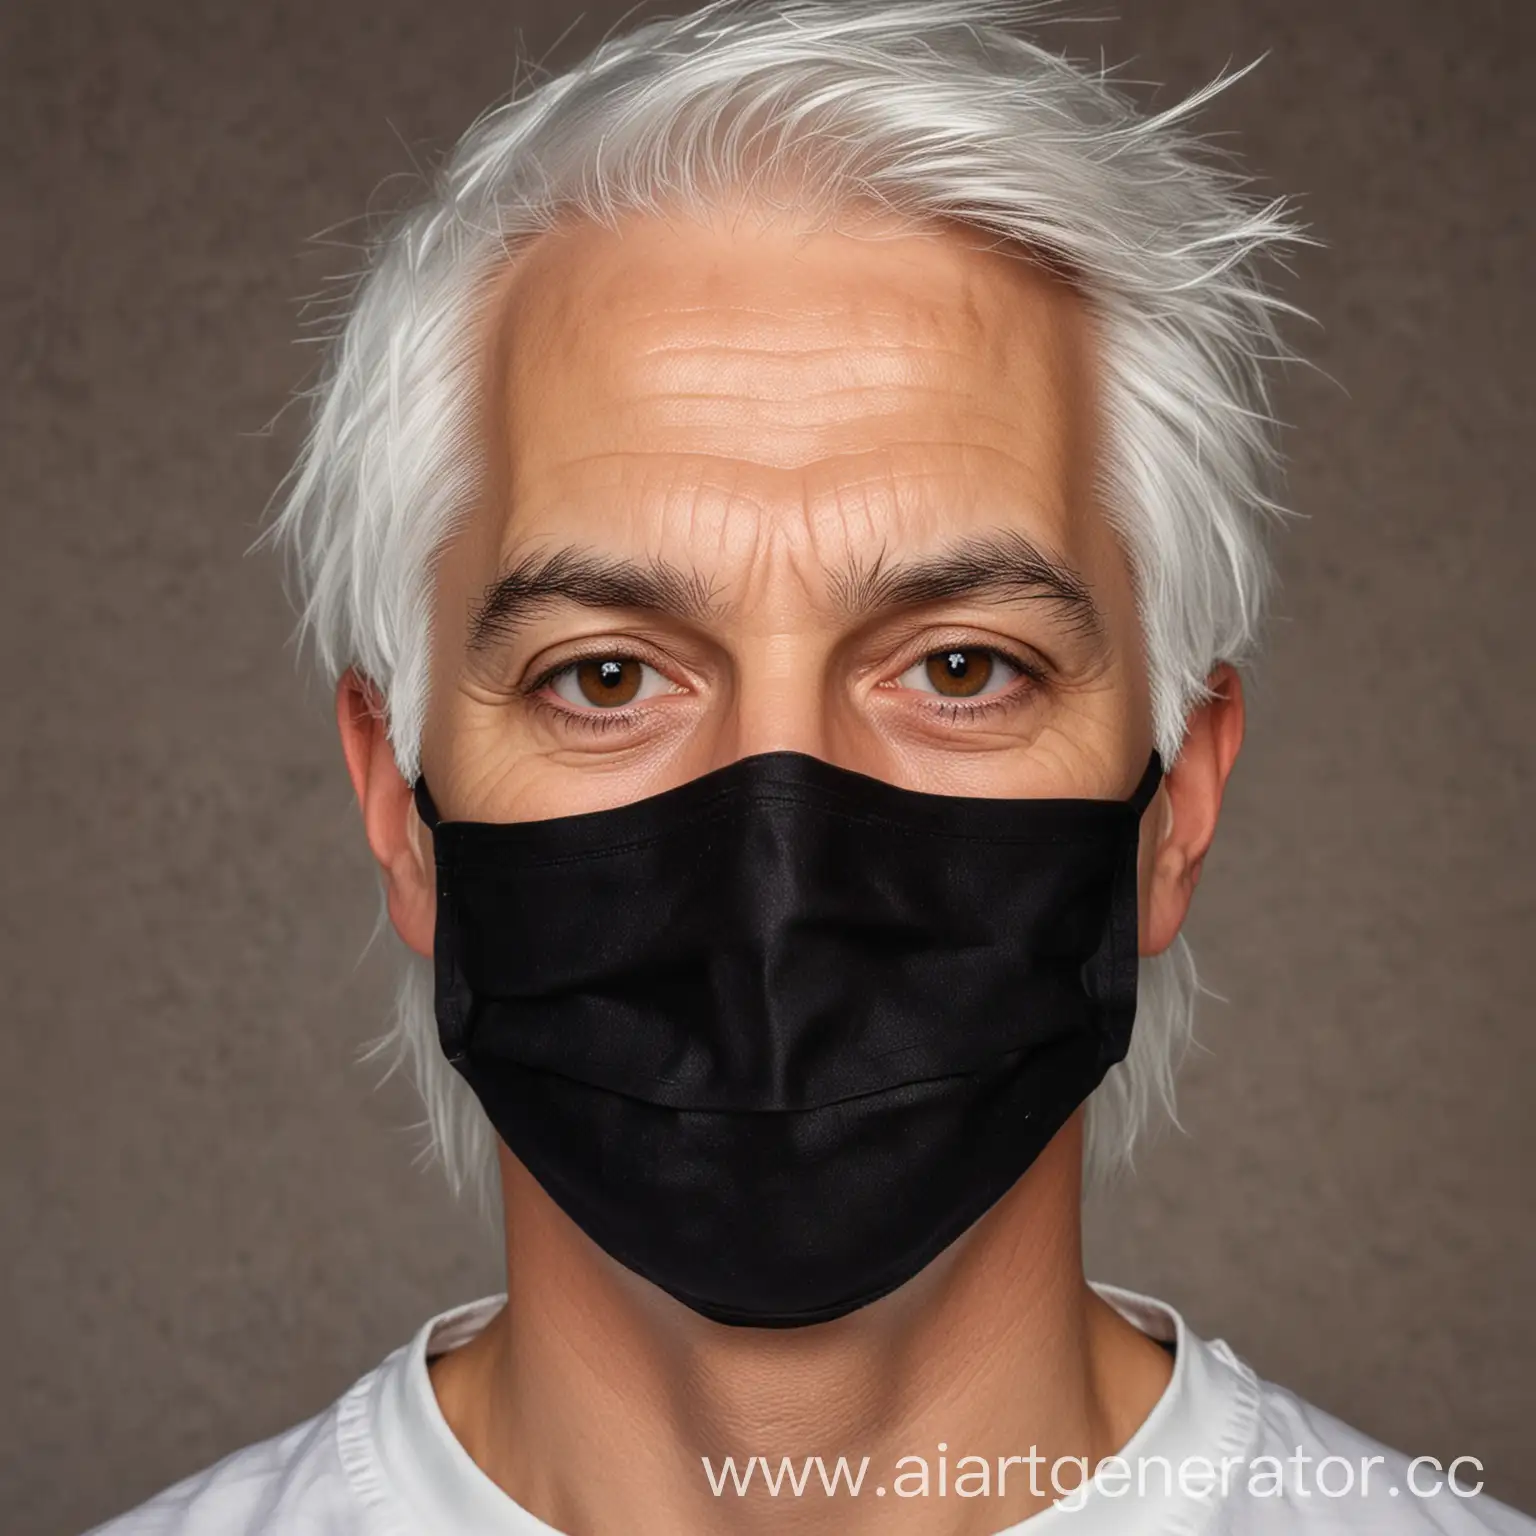 Elderly-Man-with-White-Hair-and-Brown-Eyes-Wearing-CatThemed-Medical-Mask